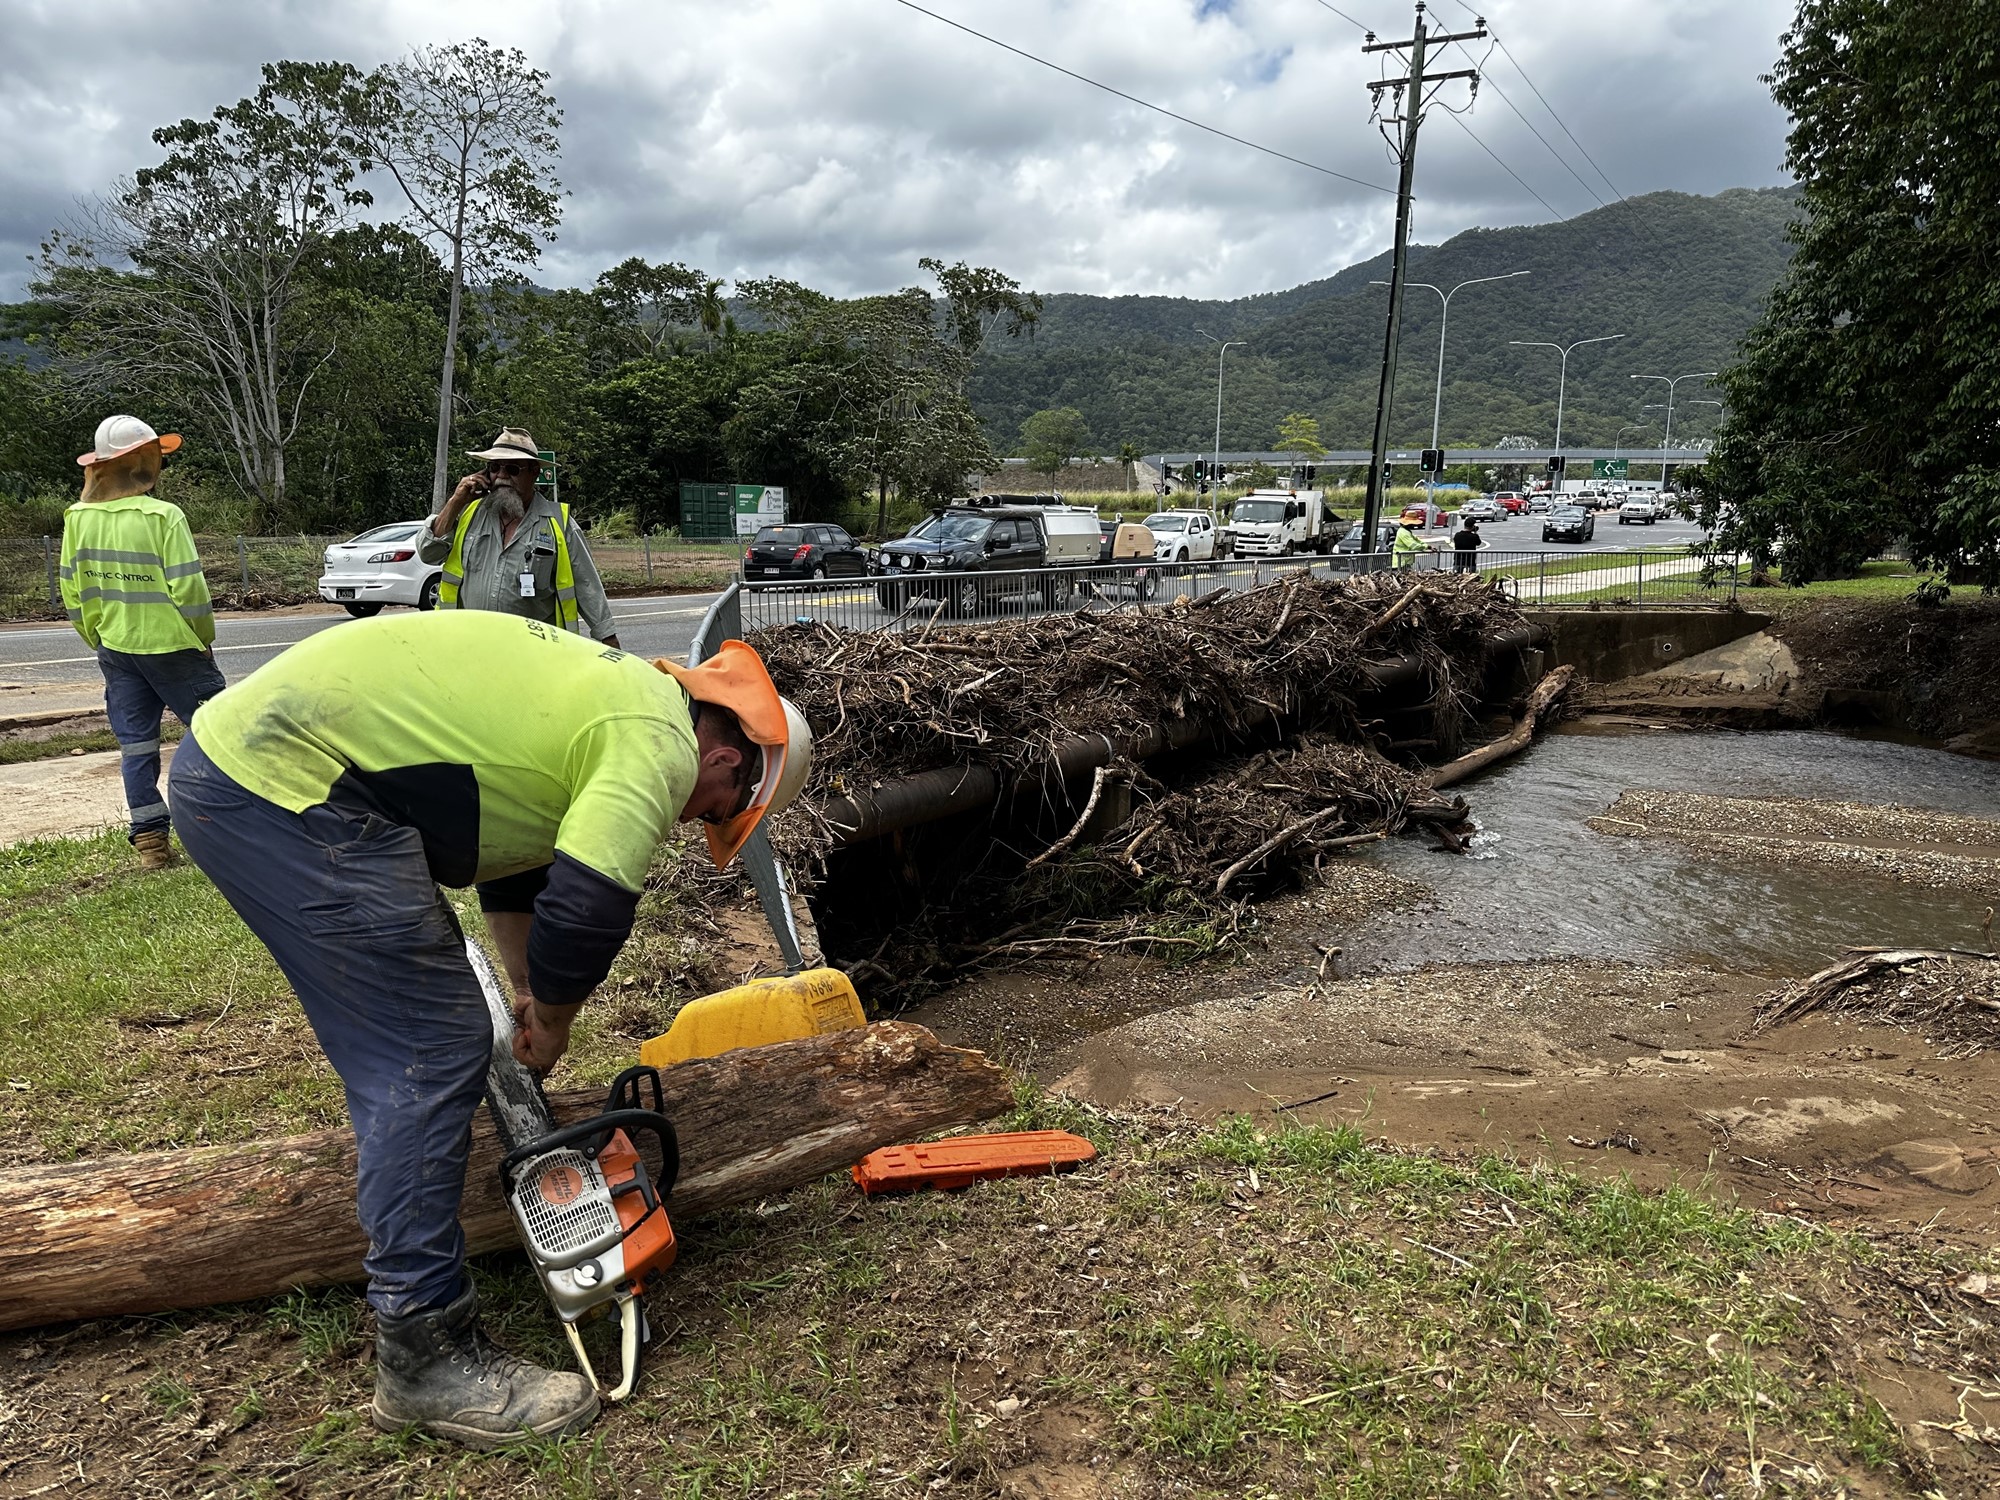 council workers use chainsaws to break up branches blocking a drain